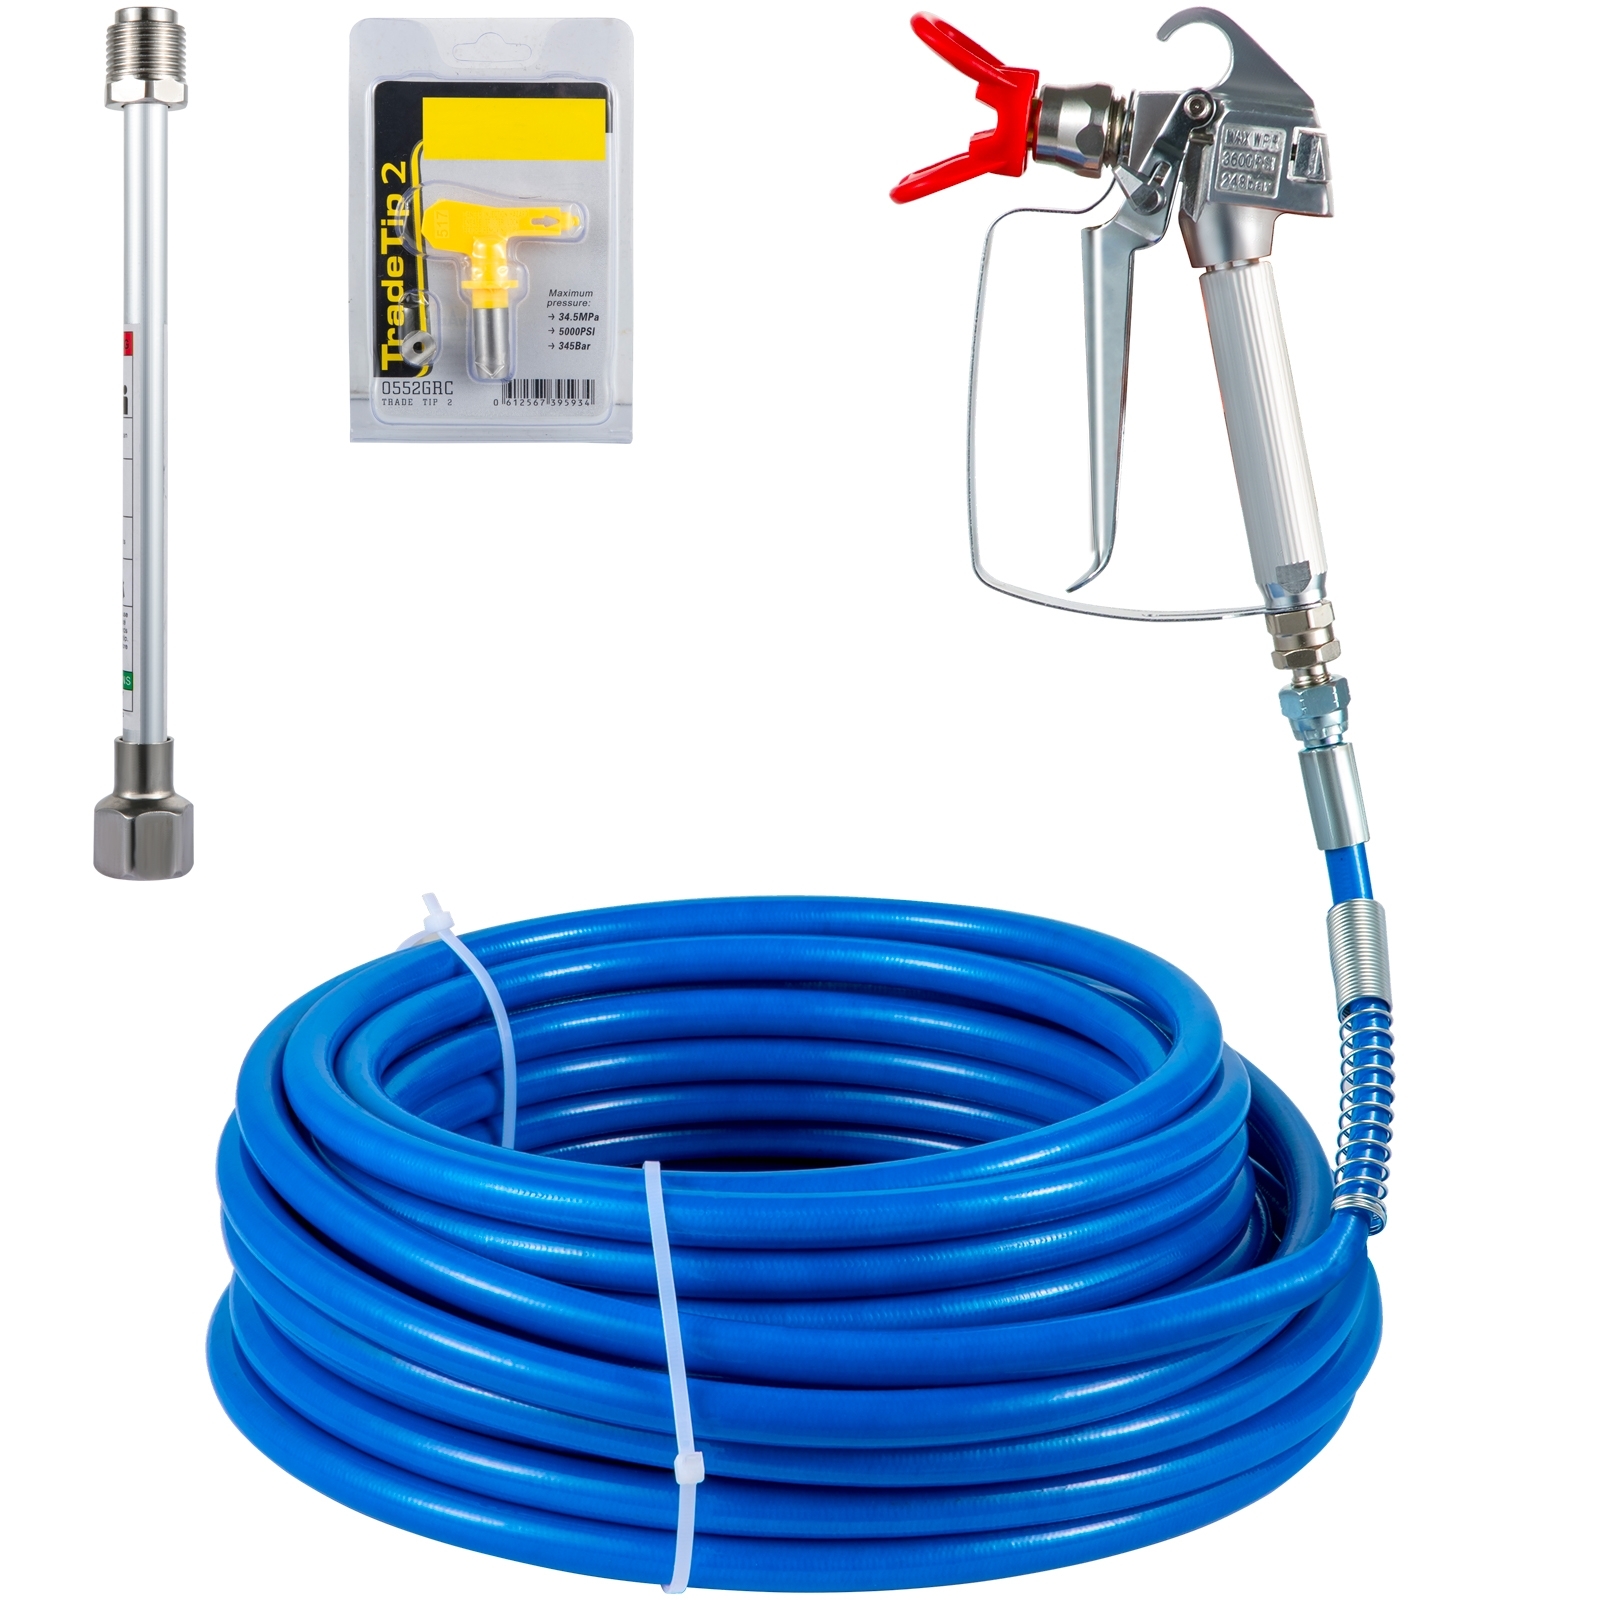 VEVOR Airless Paint Spray Hose Kit 50ft 1/4"Swivel Joint 3600psi with 517 Tip от Vevor Many GEOs